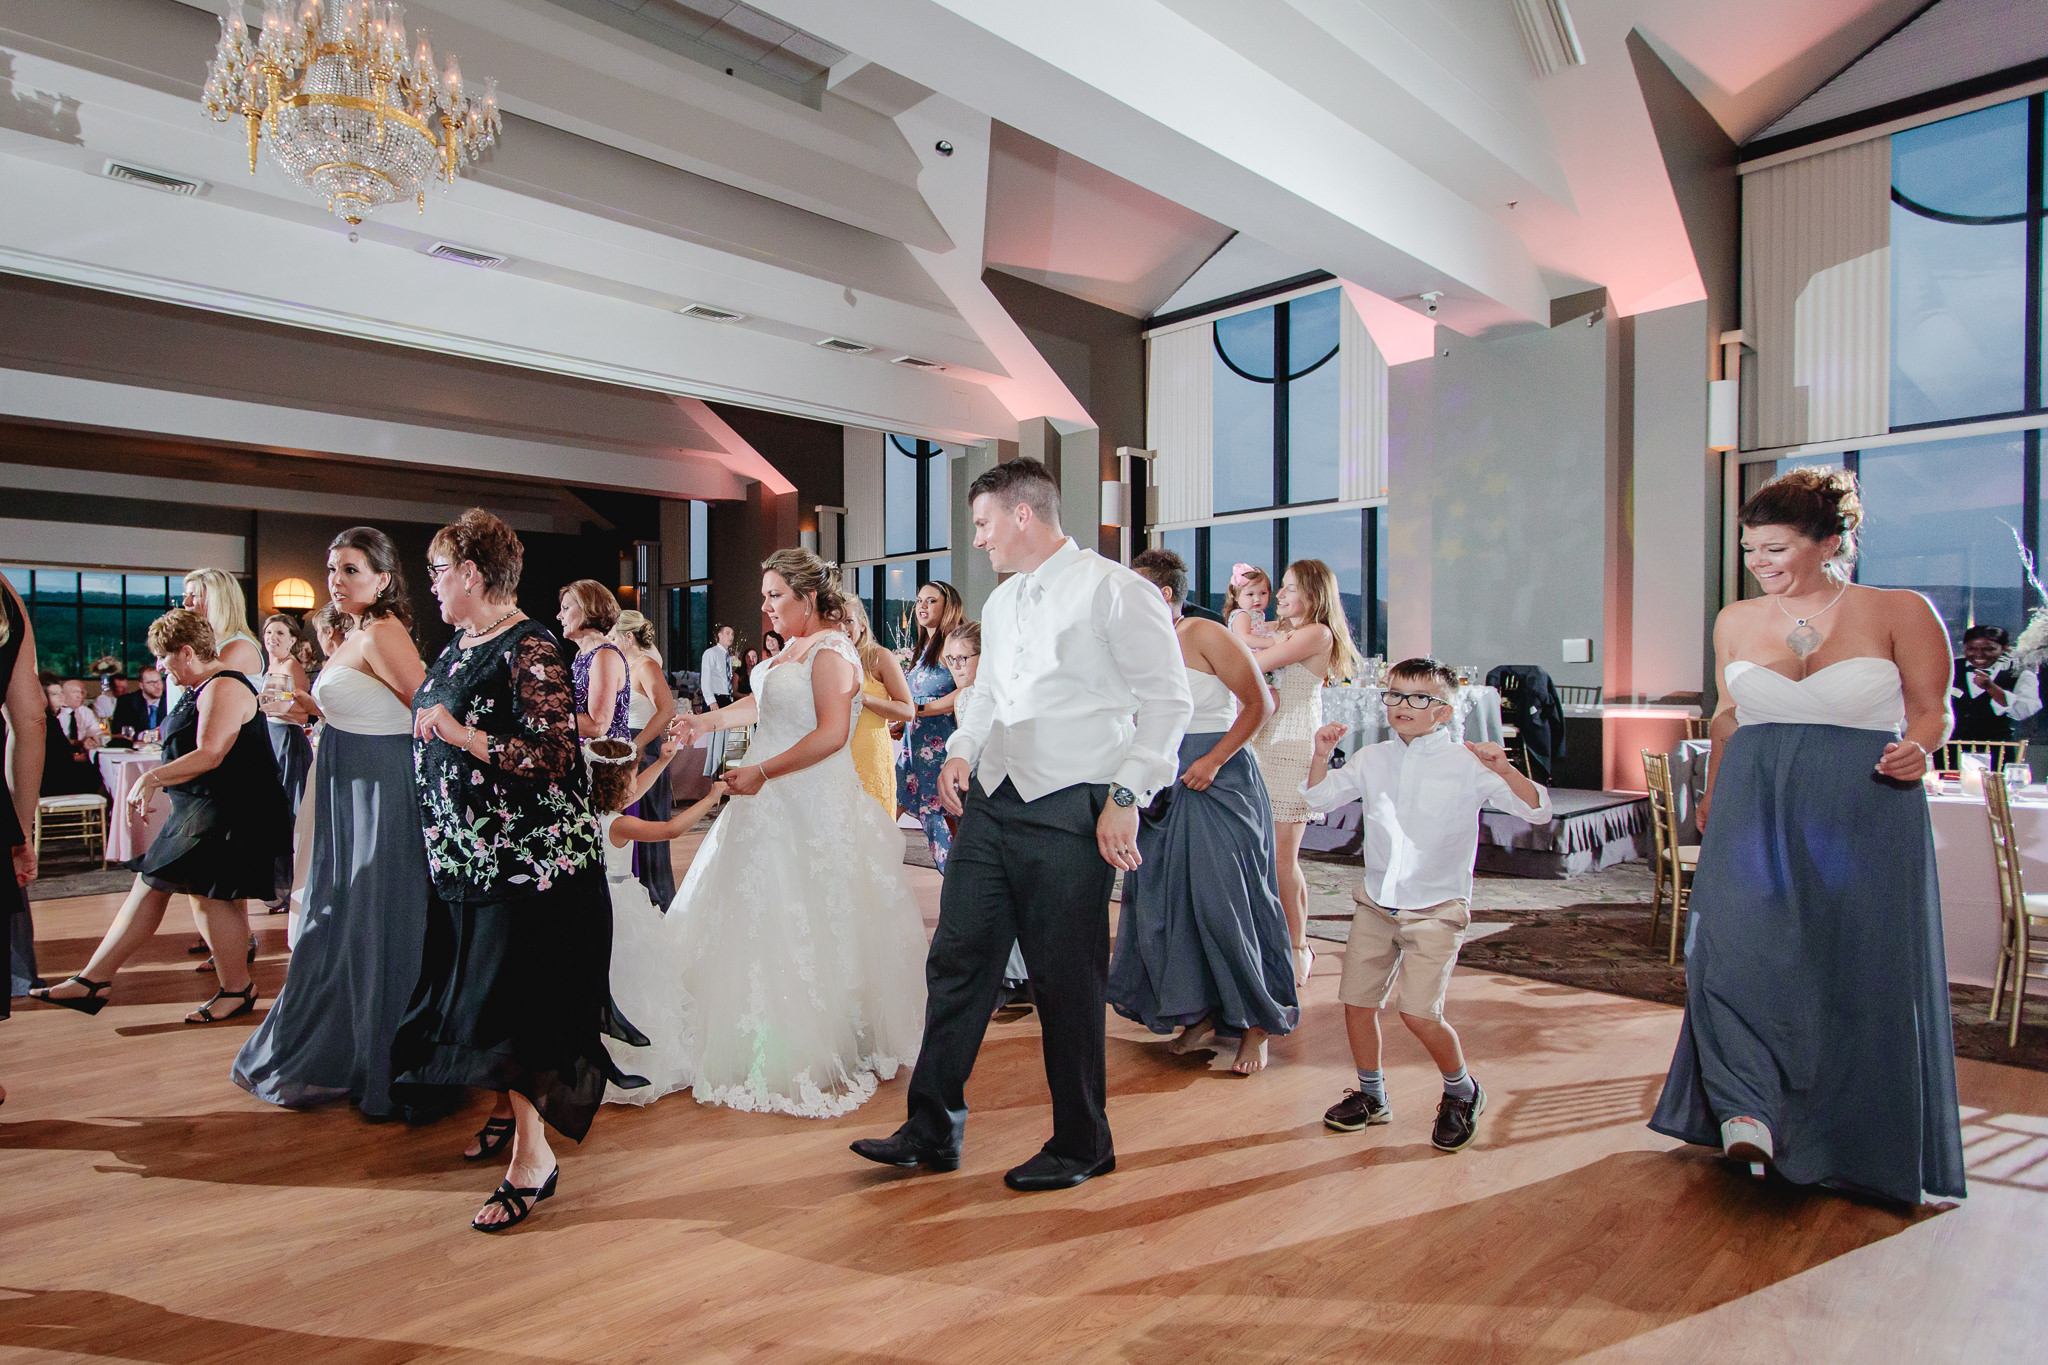 Guests dance to the Cha Cha Slide at Chestnut Ridge Golf Resort